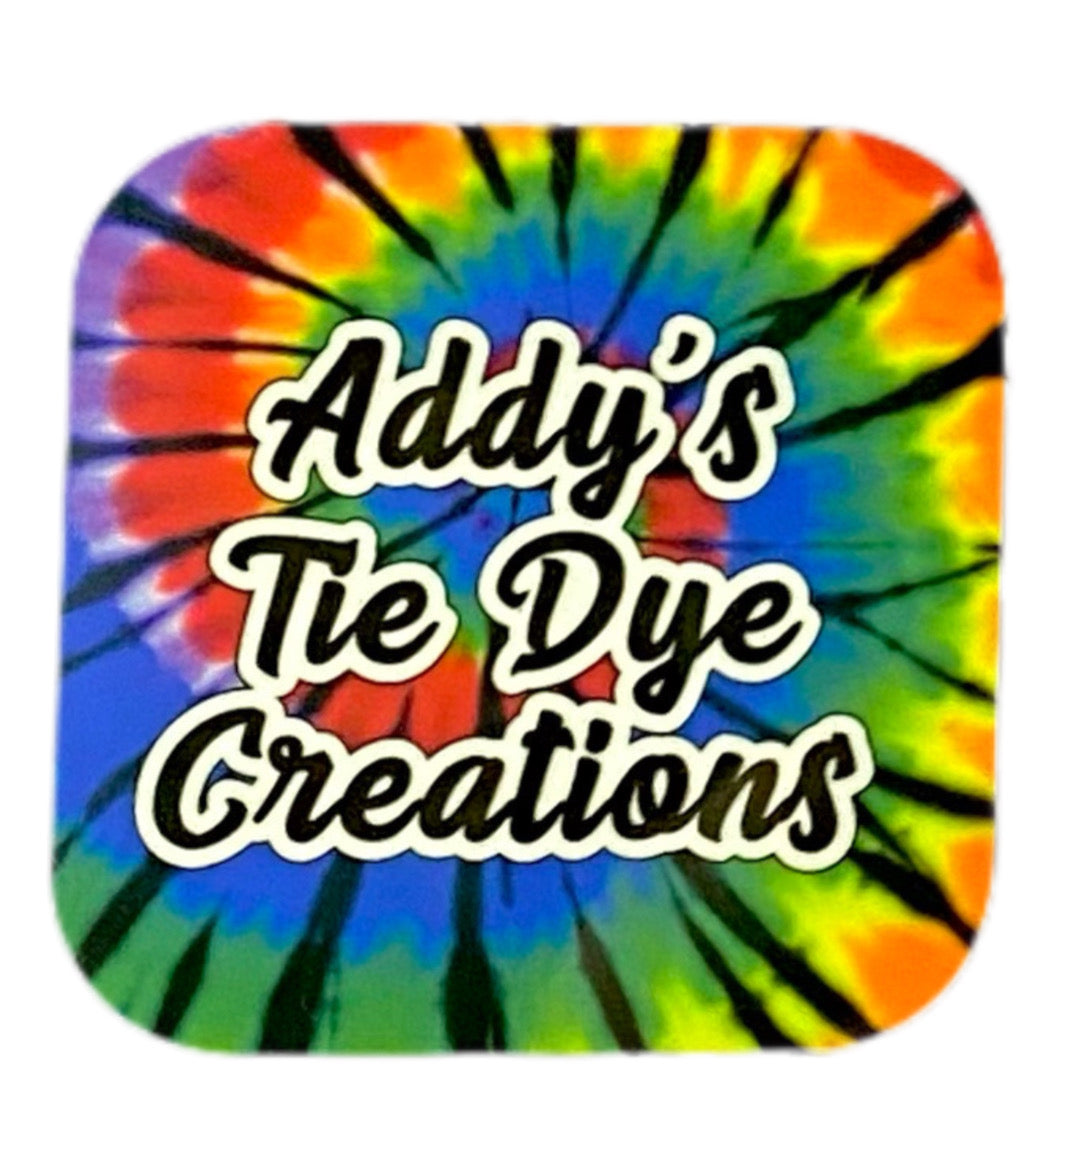 Addys Tie Dye Creations magnets you choose pattern